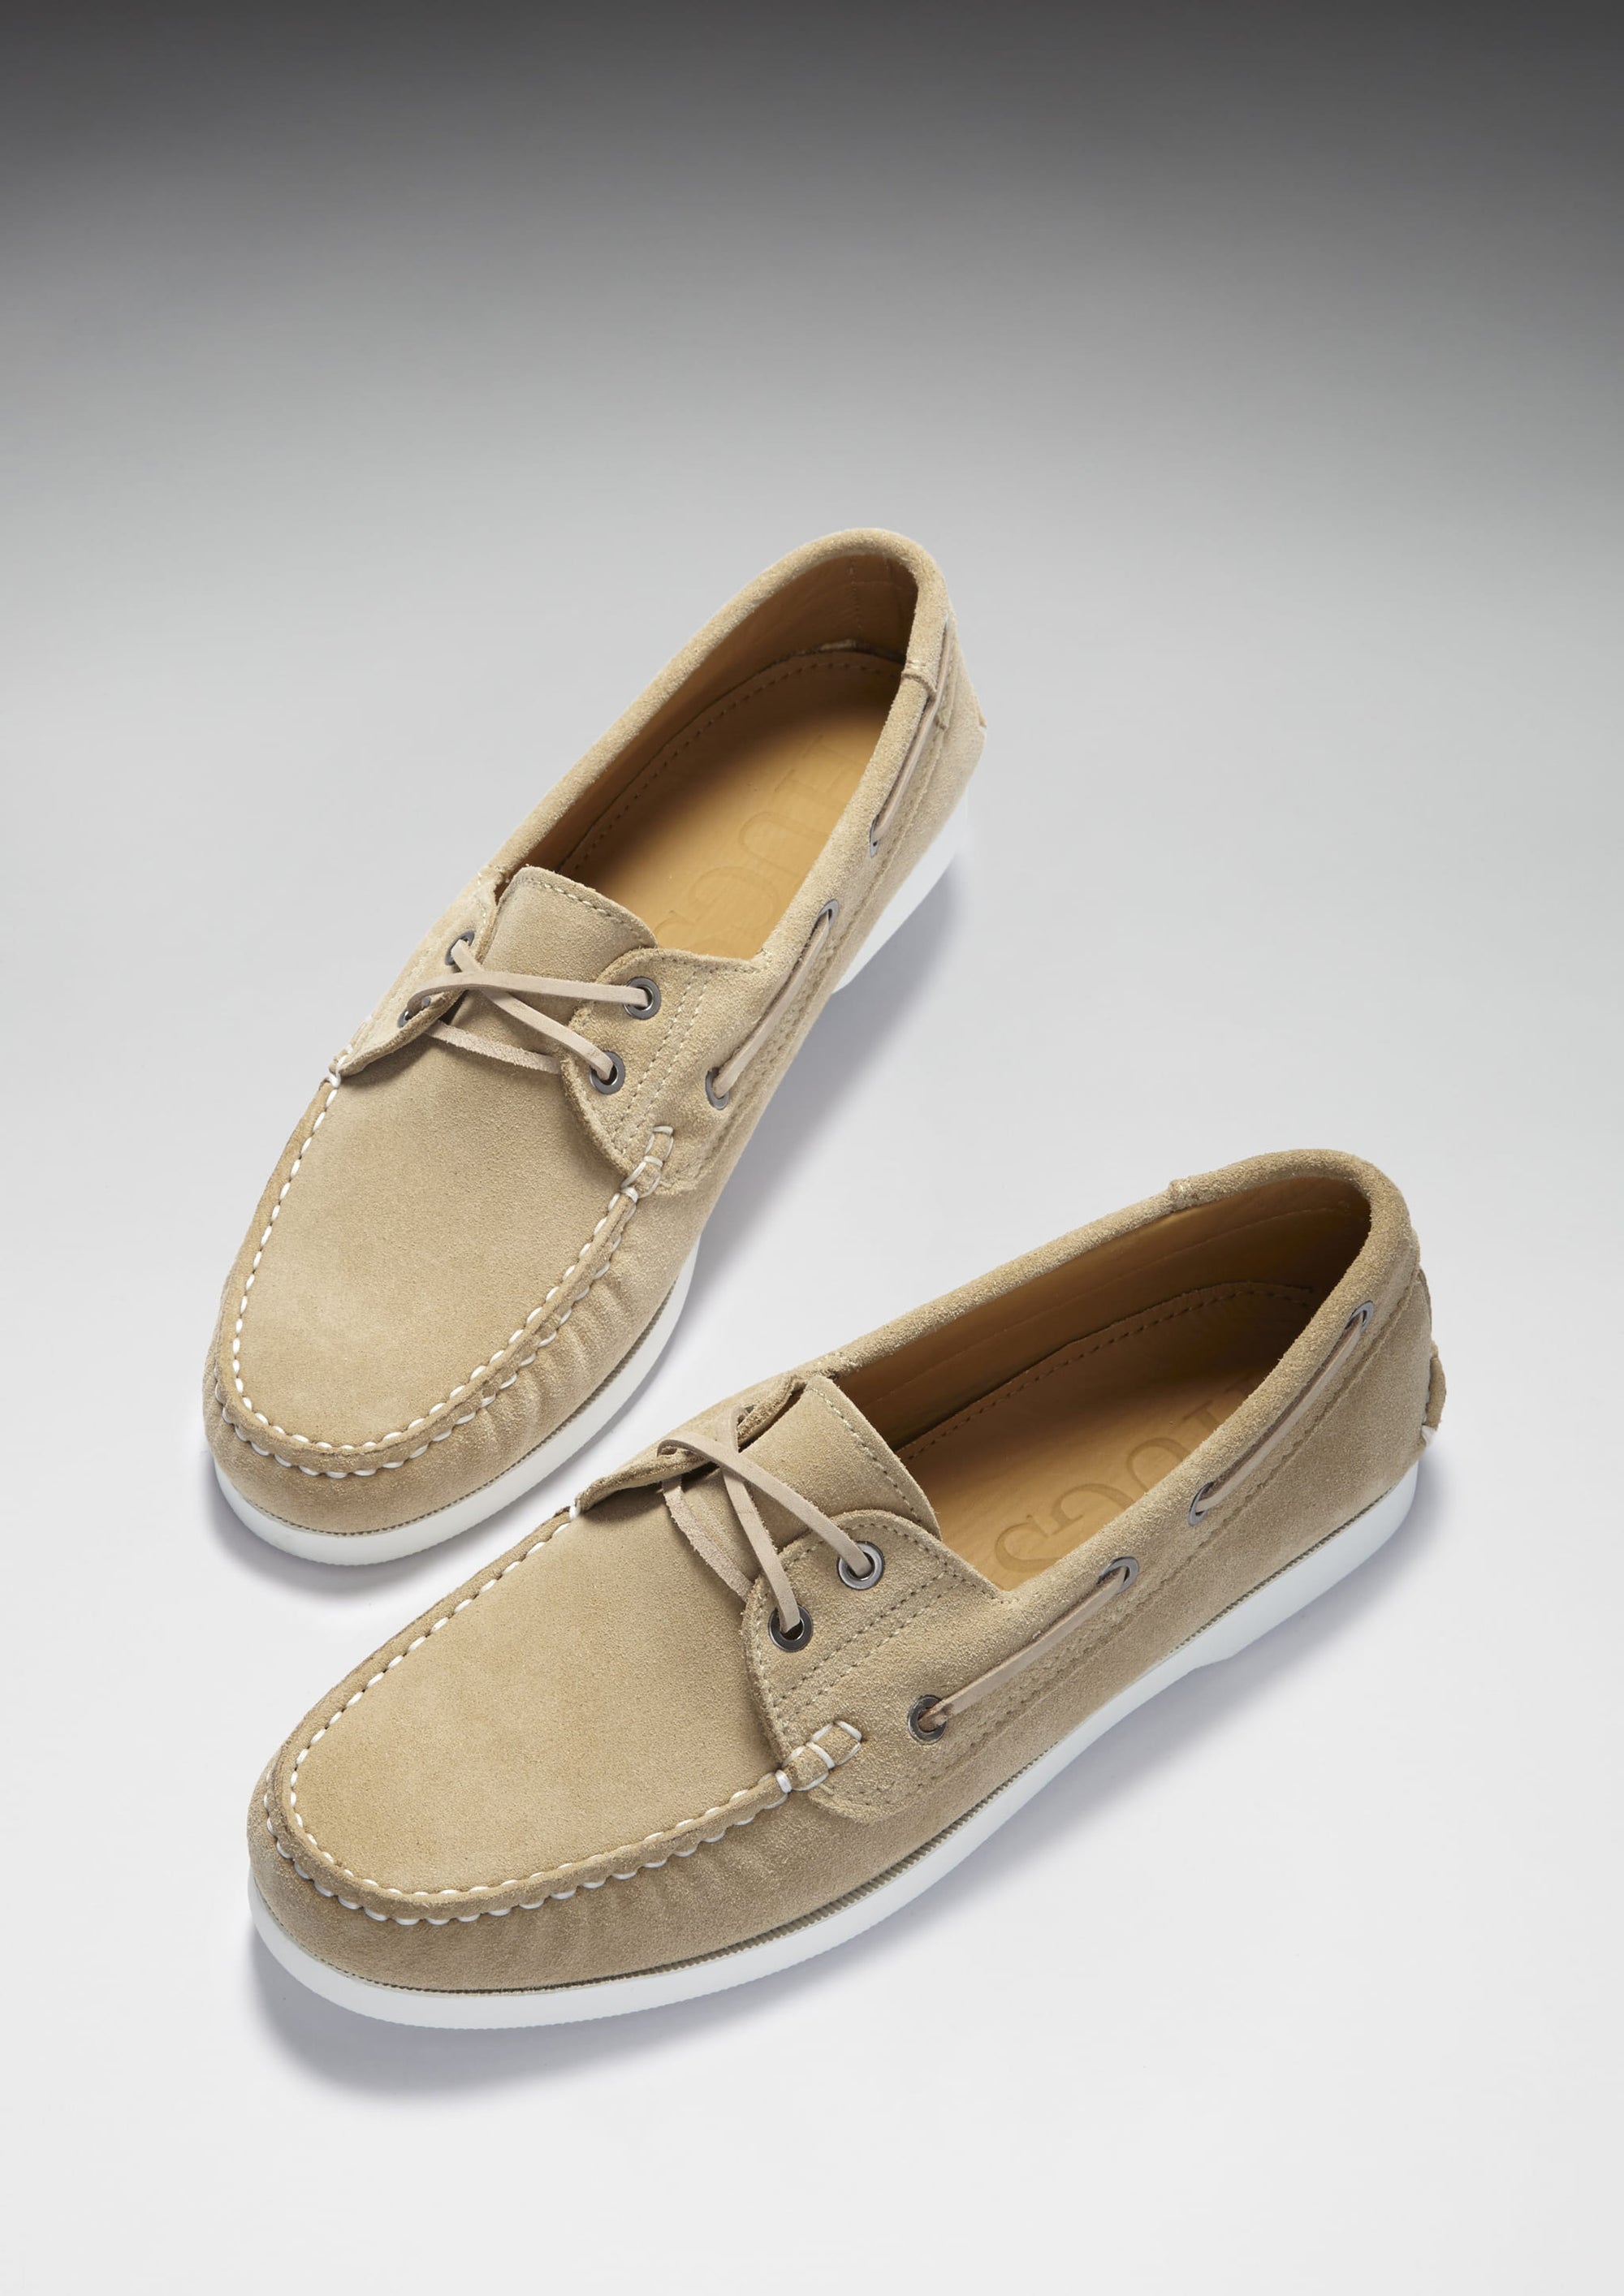 Deck Shoes, Taupe Suede, Hugs & Co.